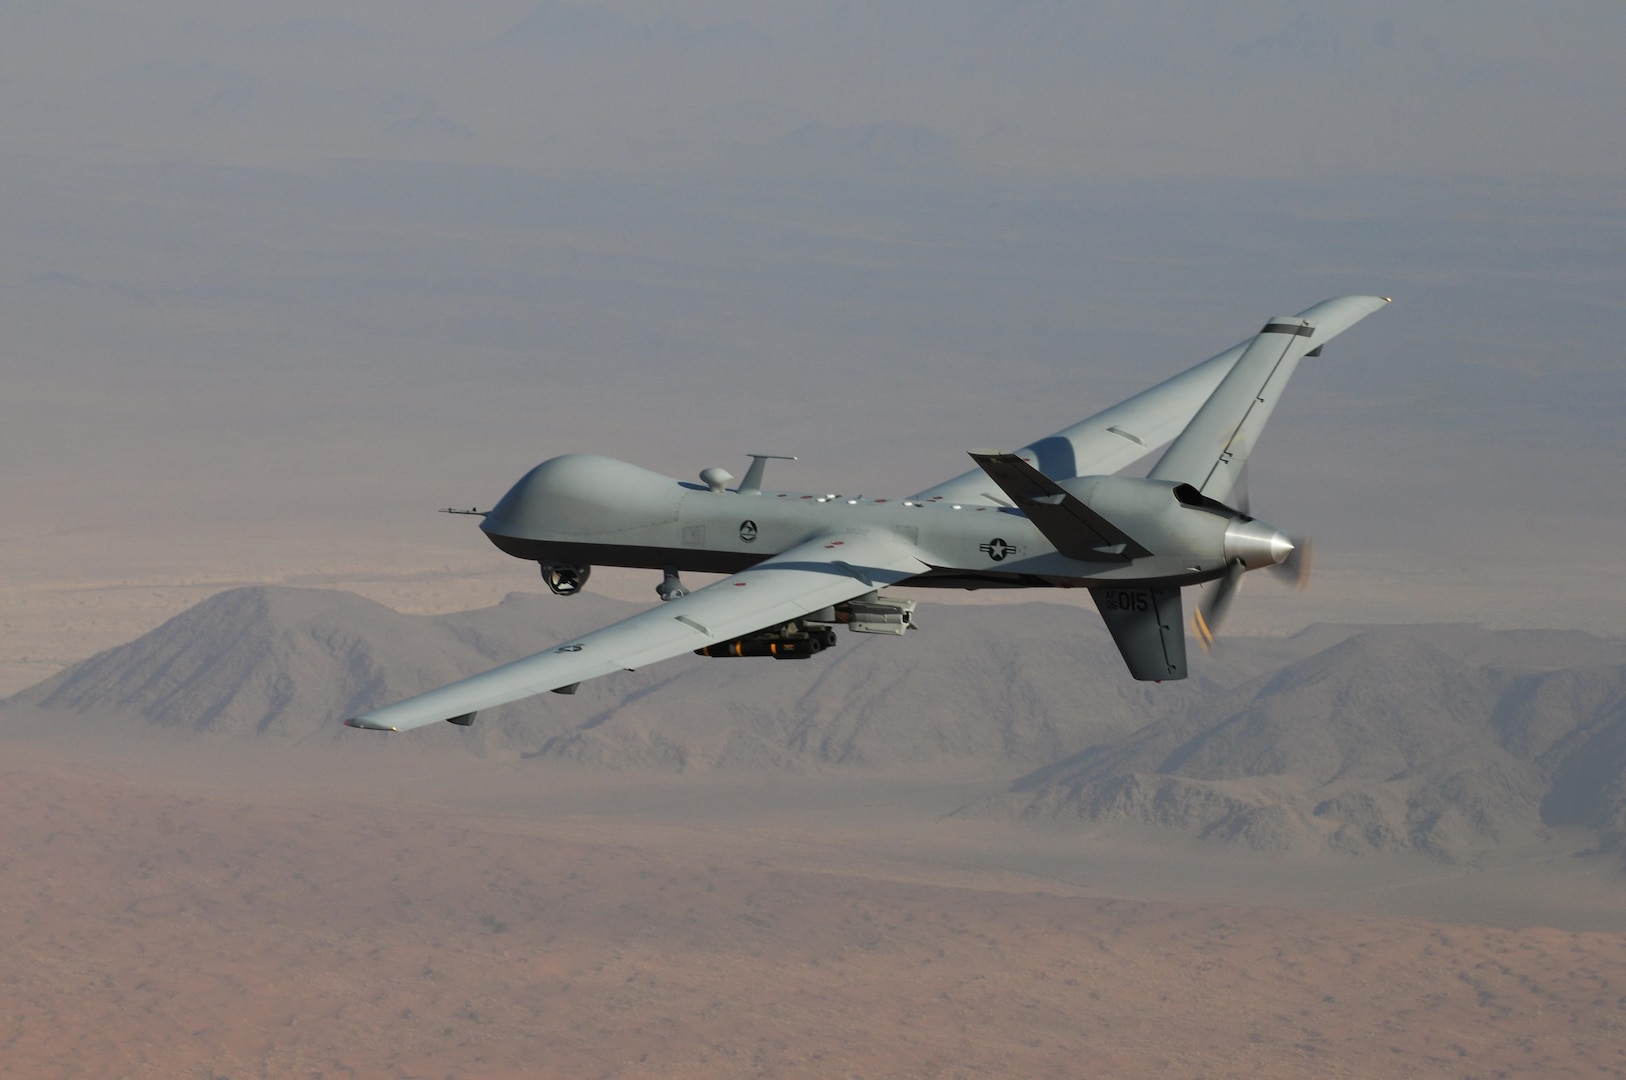 An MQ-9 Reaper, armed with GBU-12 Paveway II laser guided munitions and AGM-114 Hellfire missiles, piloted by Col. Lex Turner flies a combat mission over southern Afghanistan.